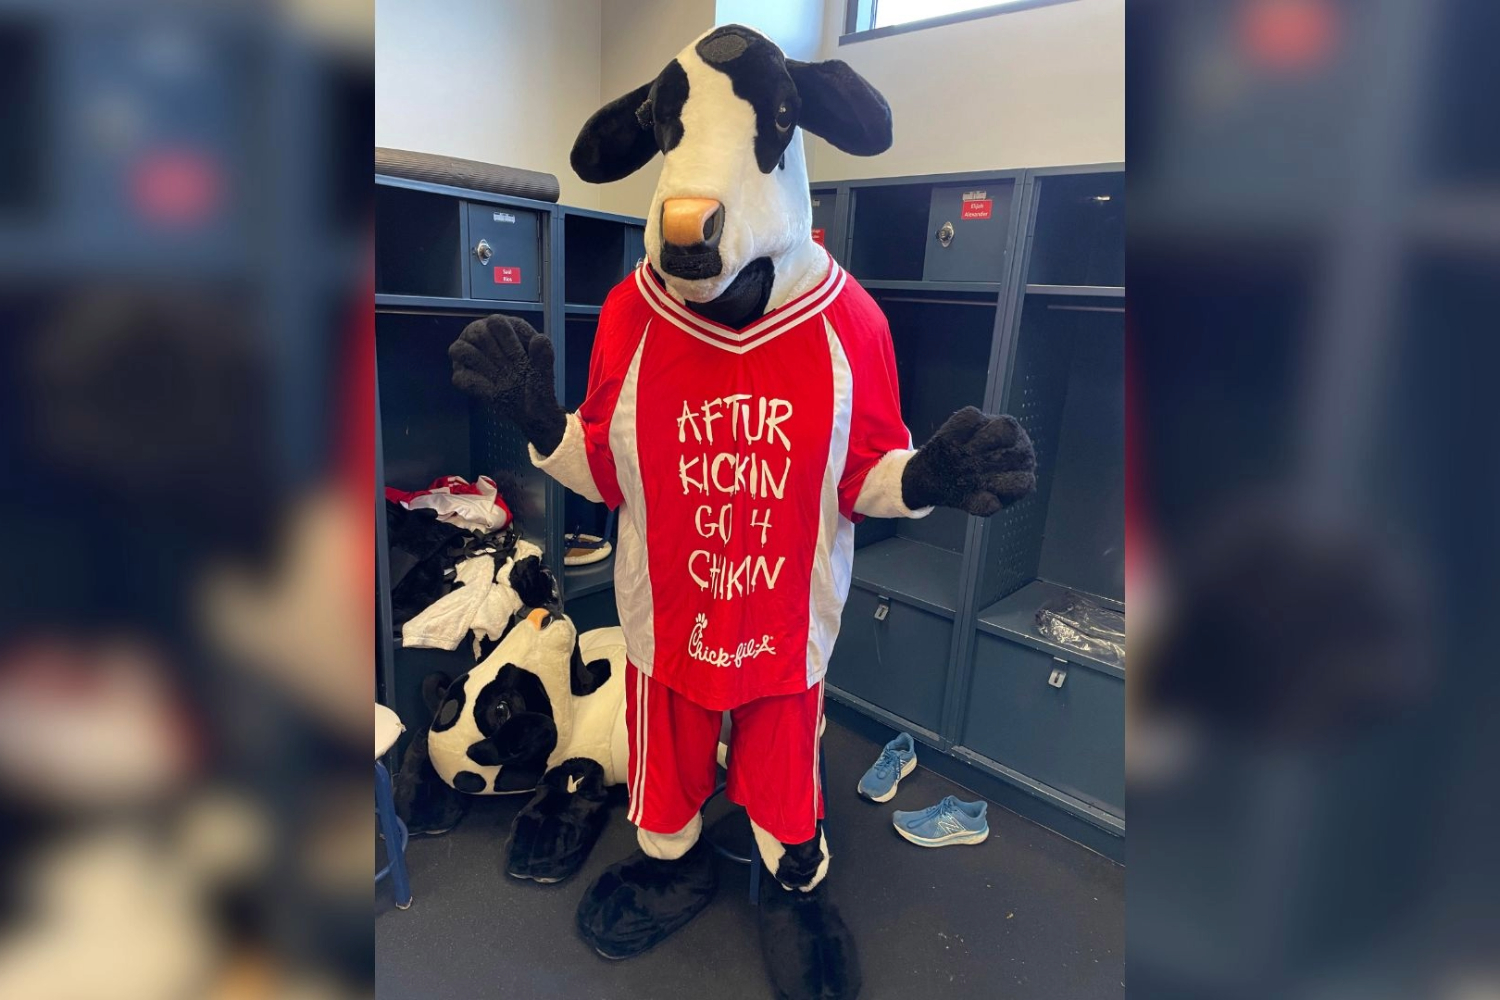 Gabriel+Quiros+on+the+MOOve+as+Chick-fil-A+mascot